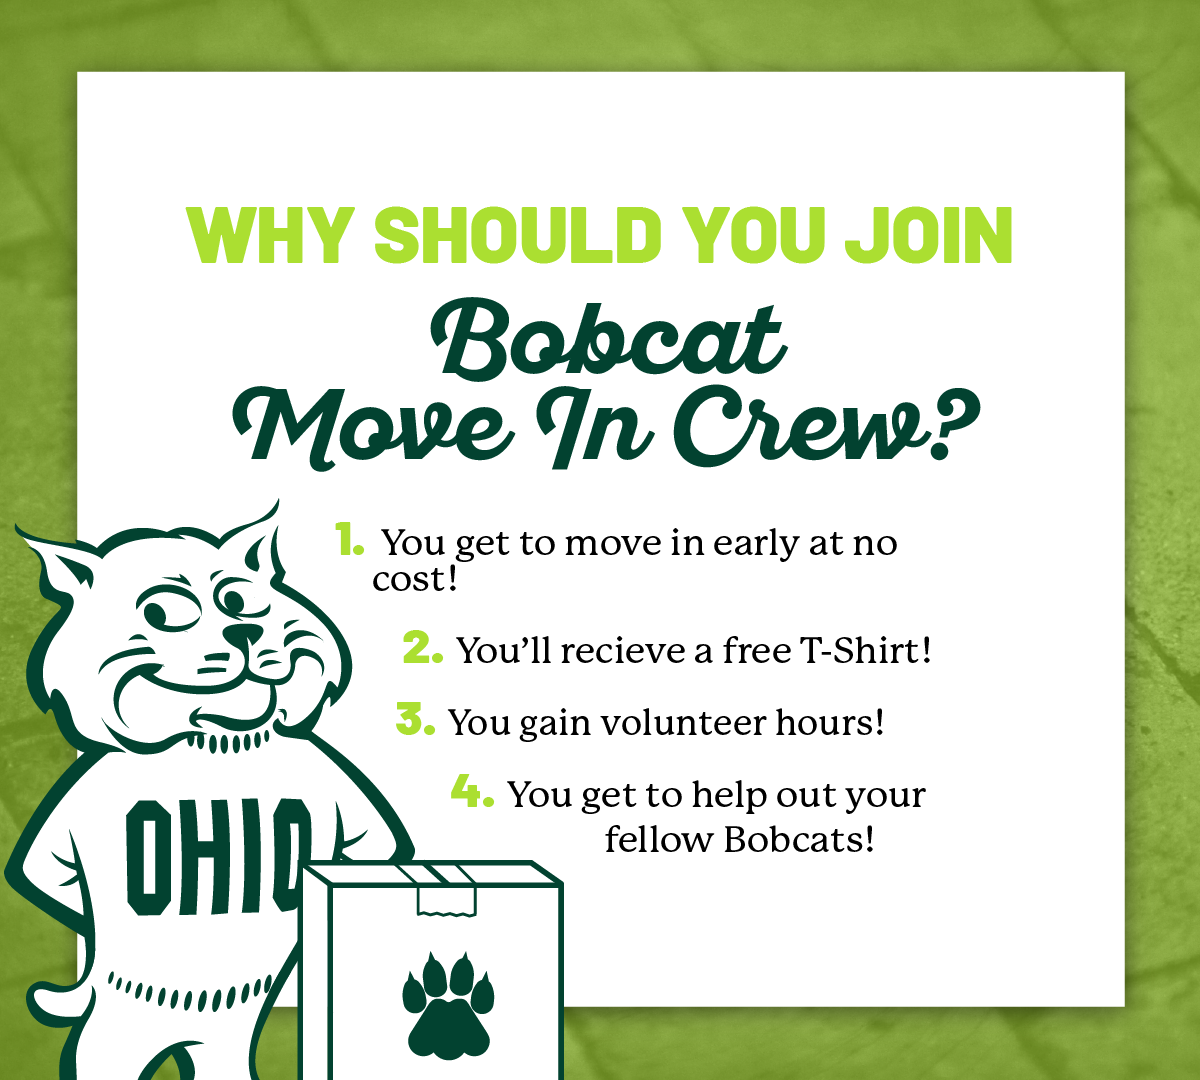 bobcat move in crew list of reasons to join